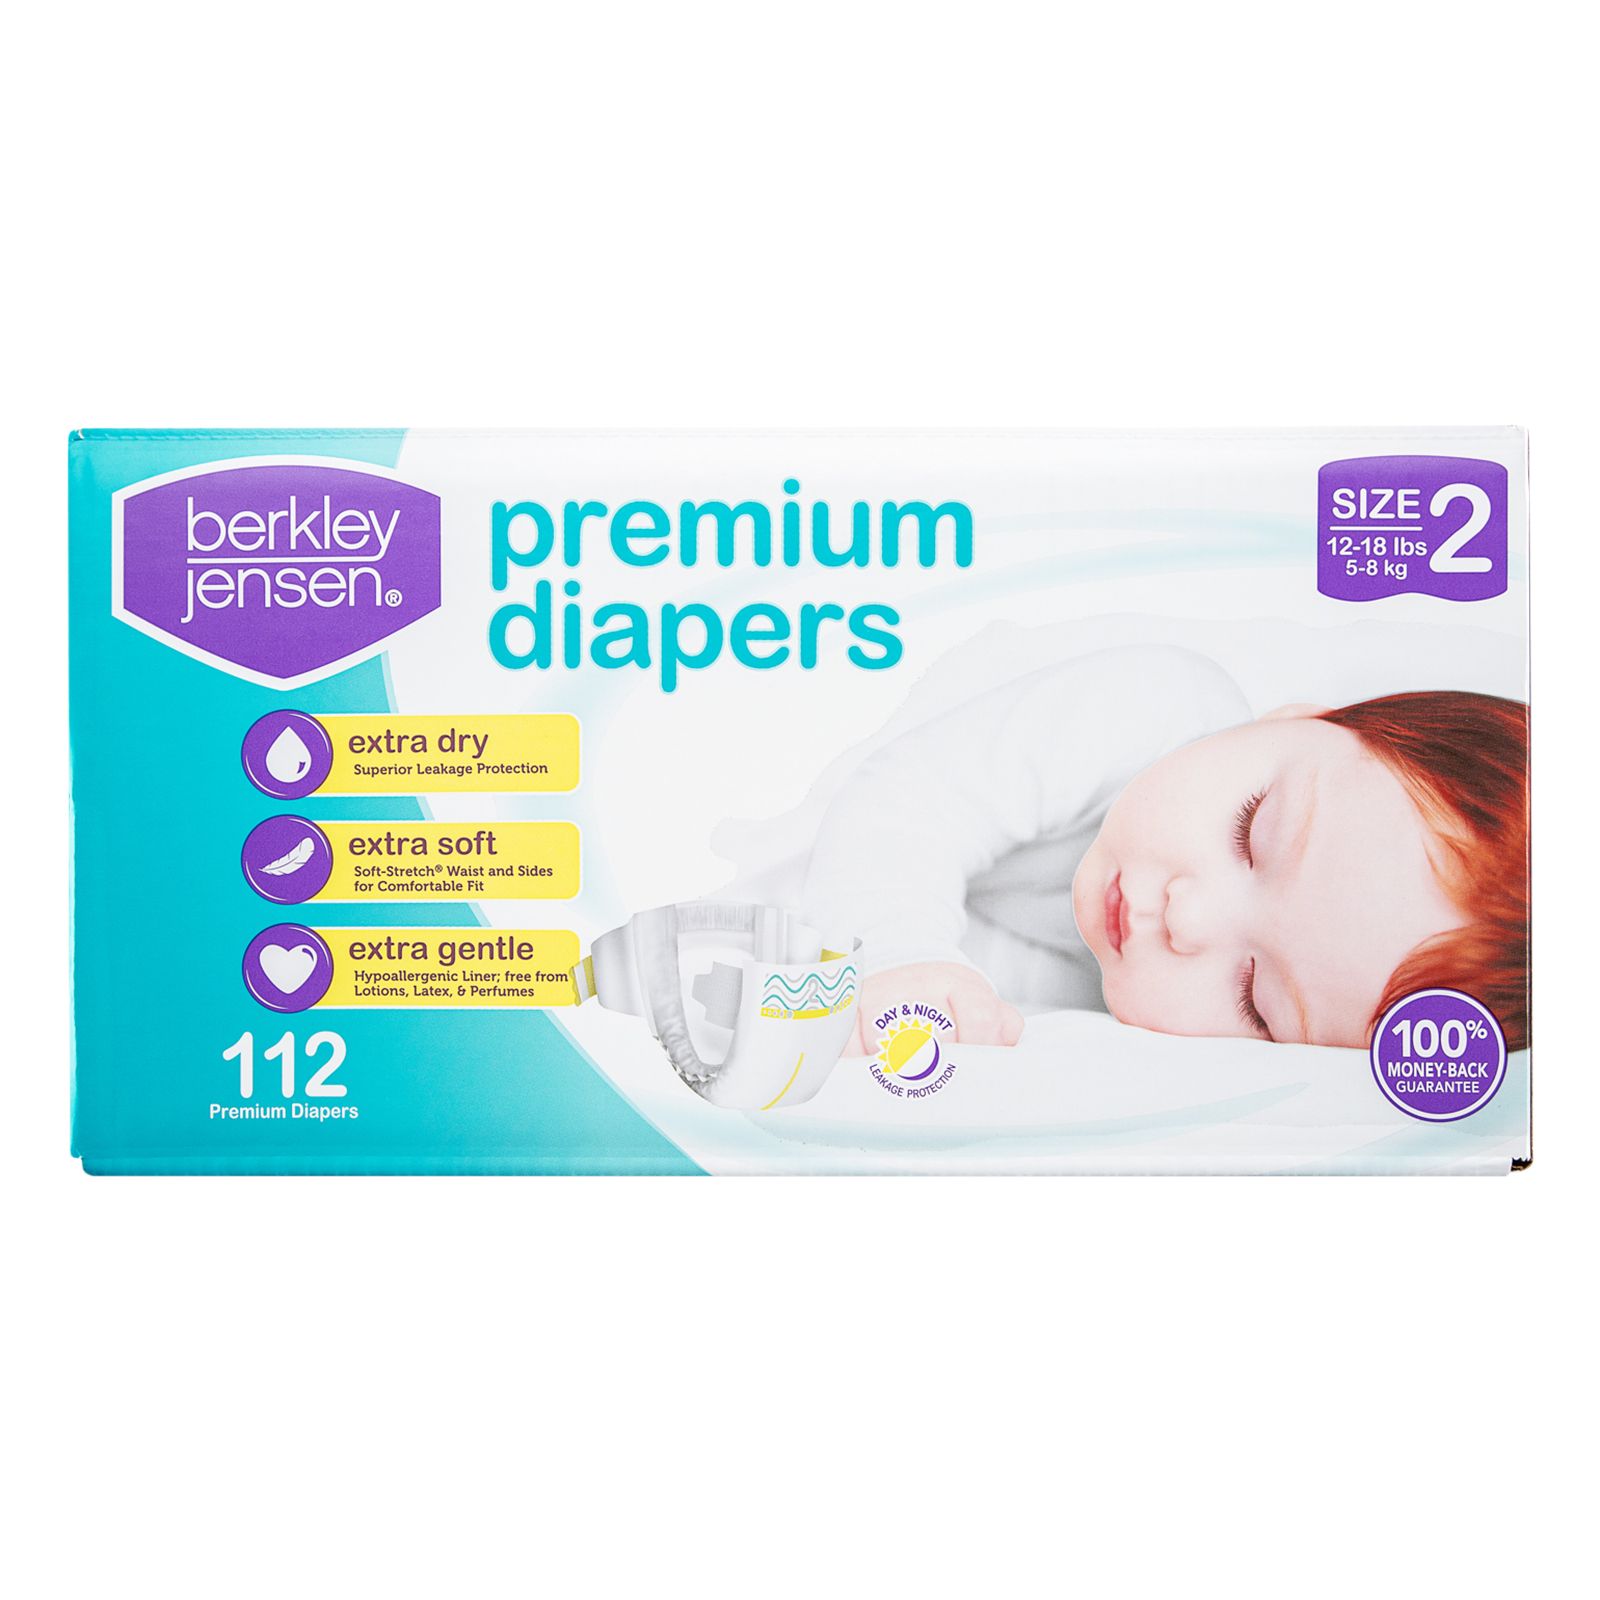 Pampers Pure Protection Diapers - Size 6, 42 Count, Hypoallergenic Premium  Disposable Baby Diapers